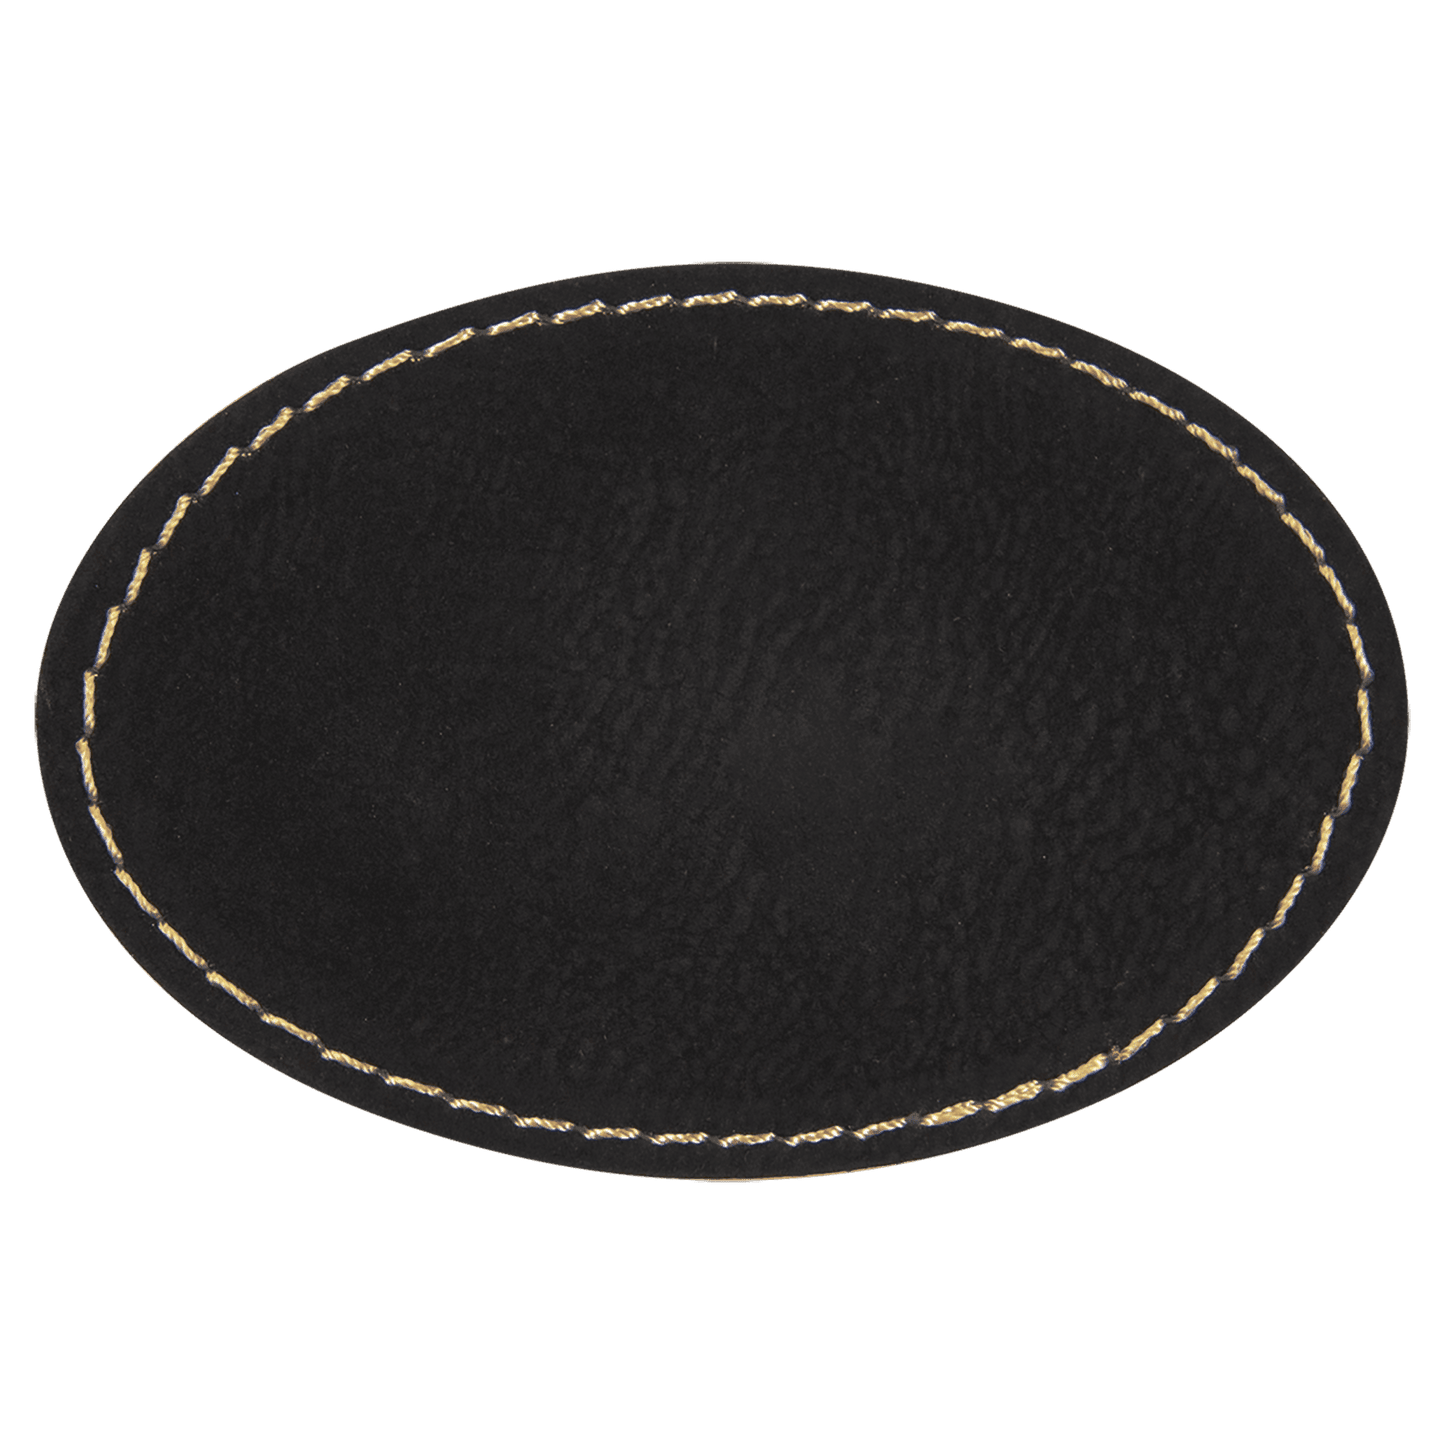 3 1/2" x 2 1/2" Oval Black Gold Laserable/DTF/UV DTF Leatherette Patch with Heat Adhesive